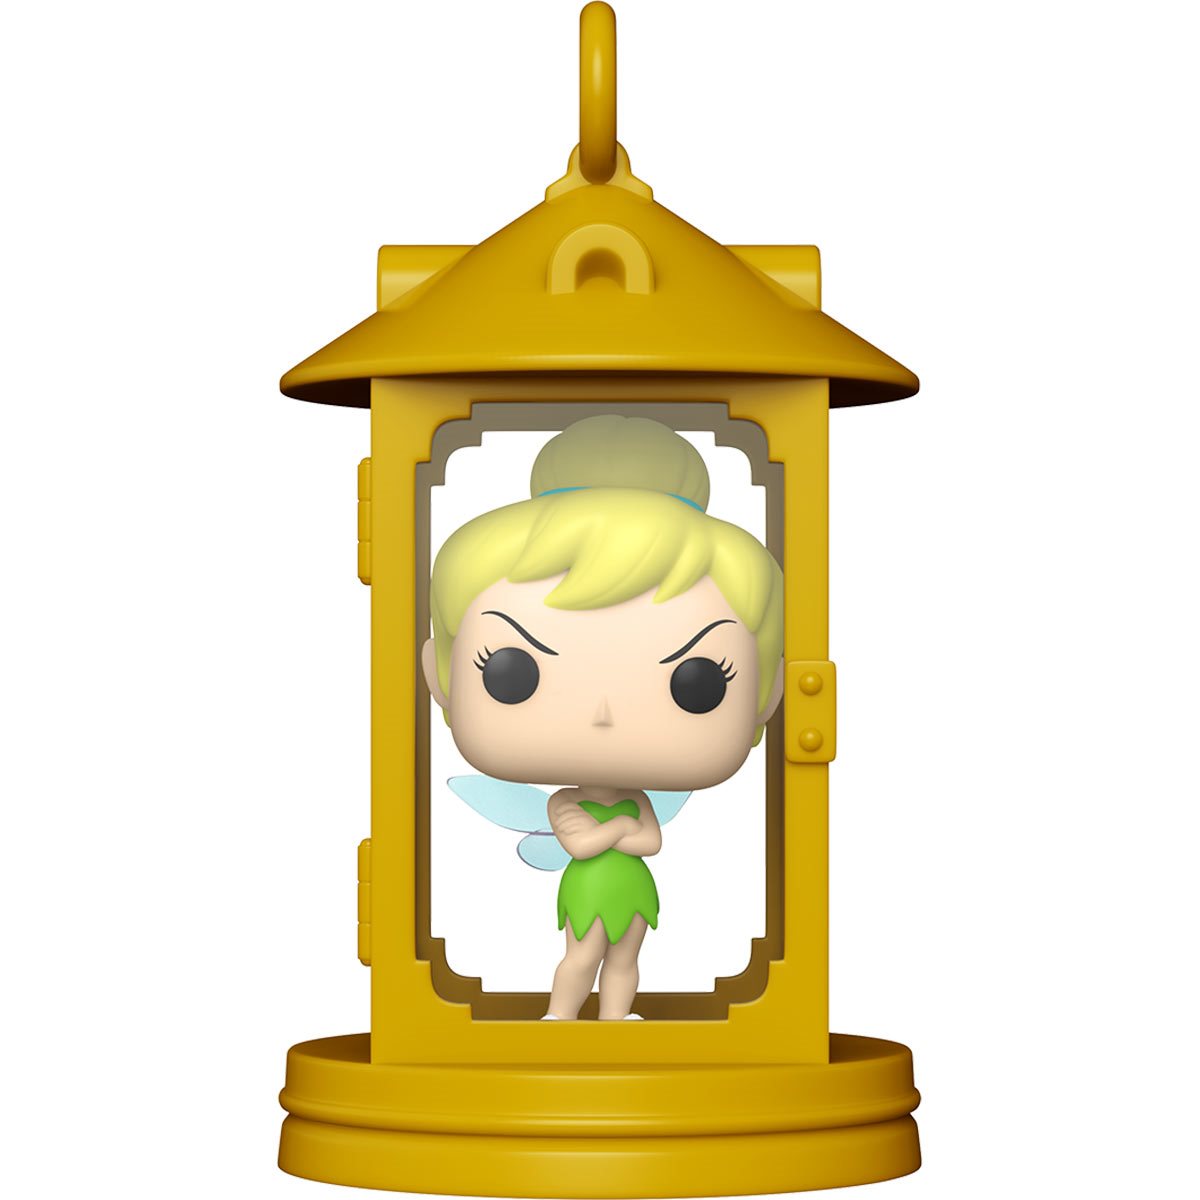 Funko Peter Pan Tinkerbell Trapped Deluxe Pop! #1331